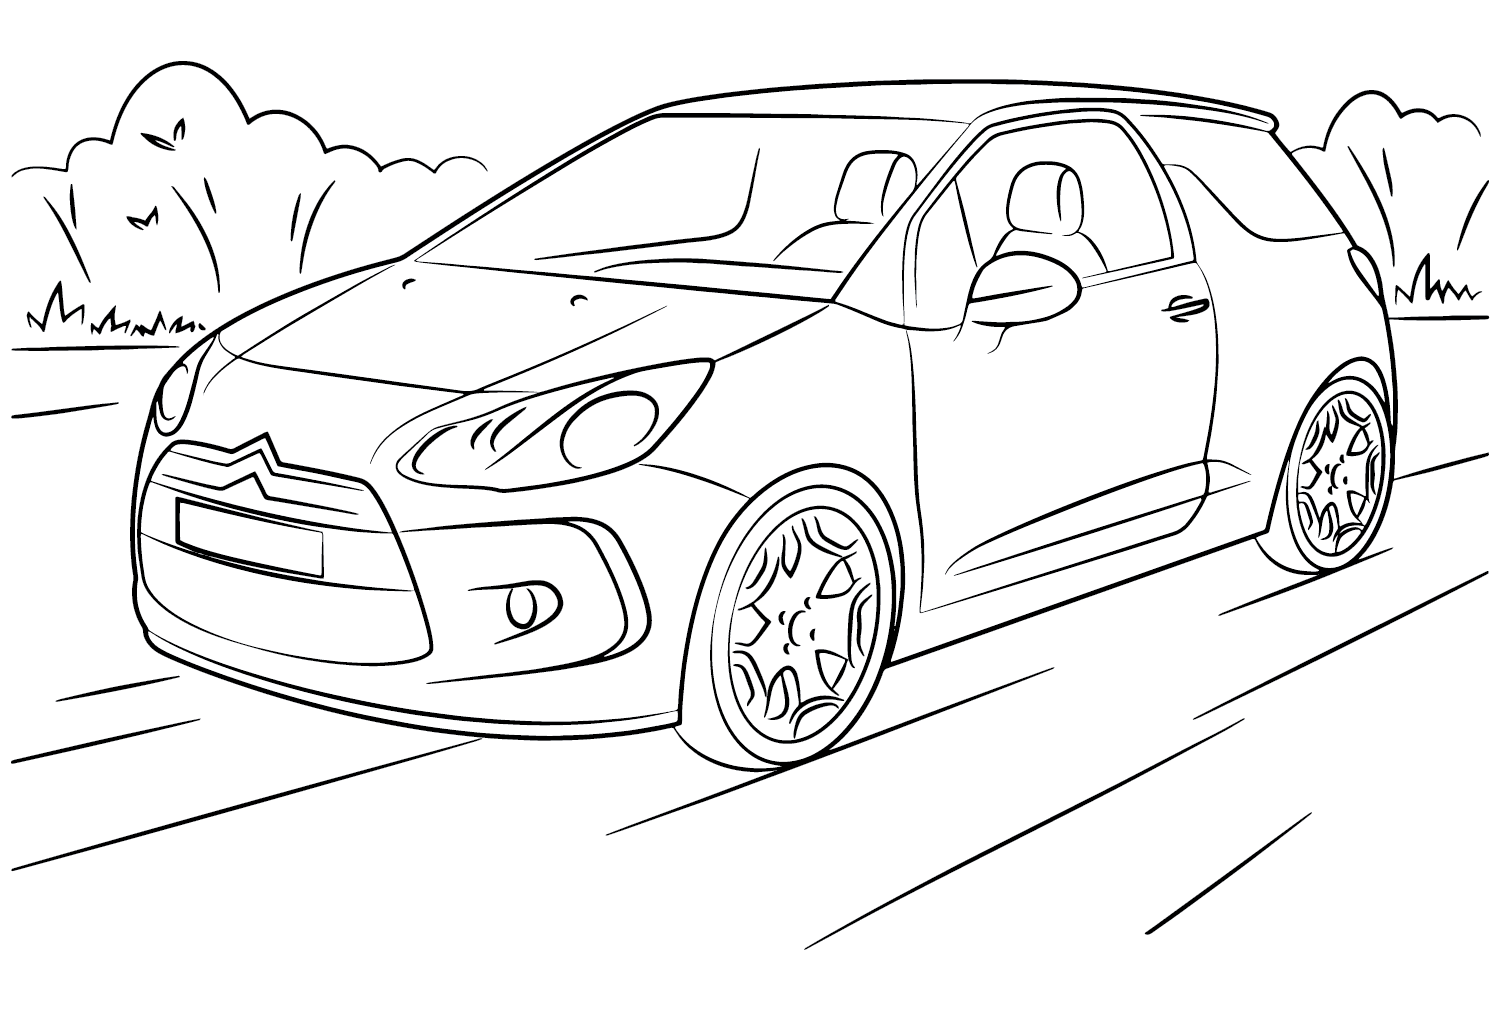 Citroën DS3 Coloring Page from Citroën